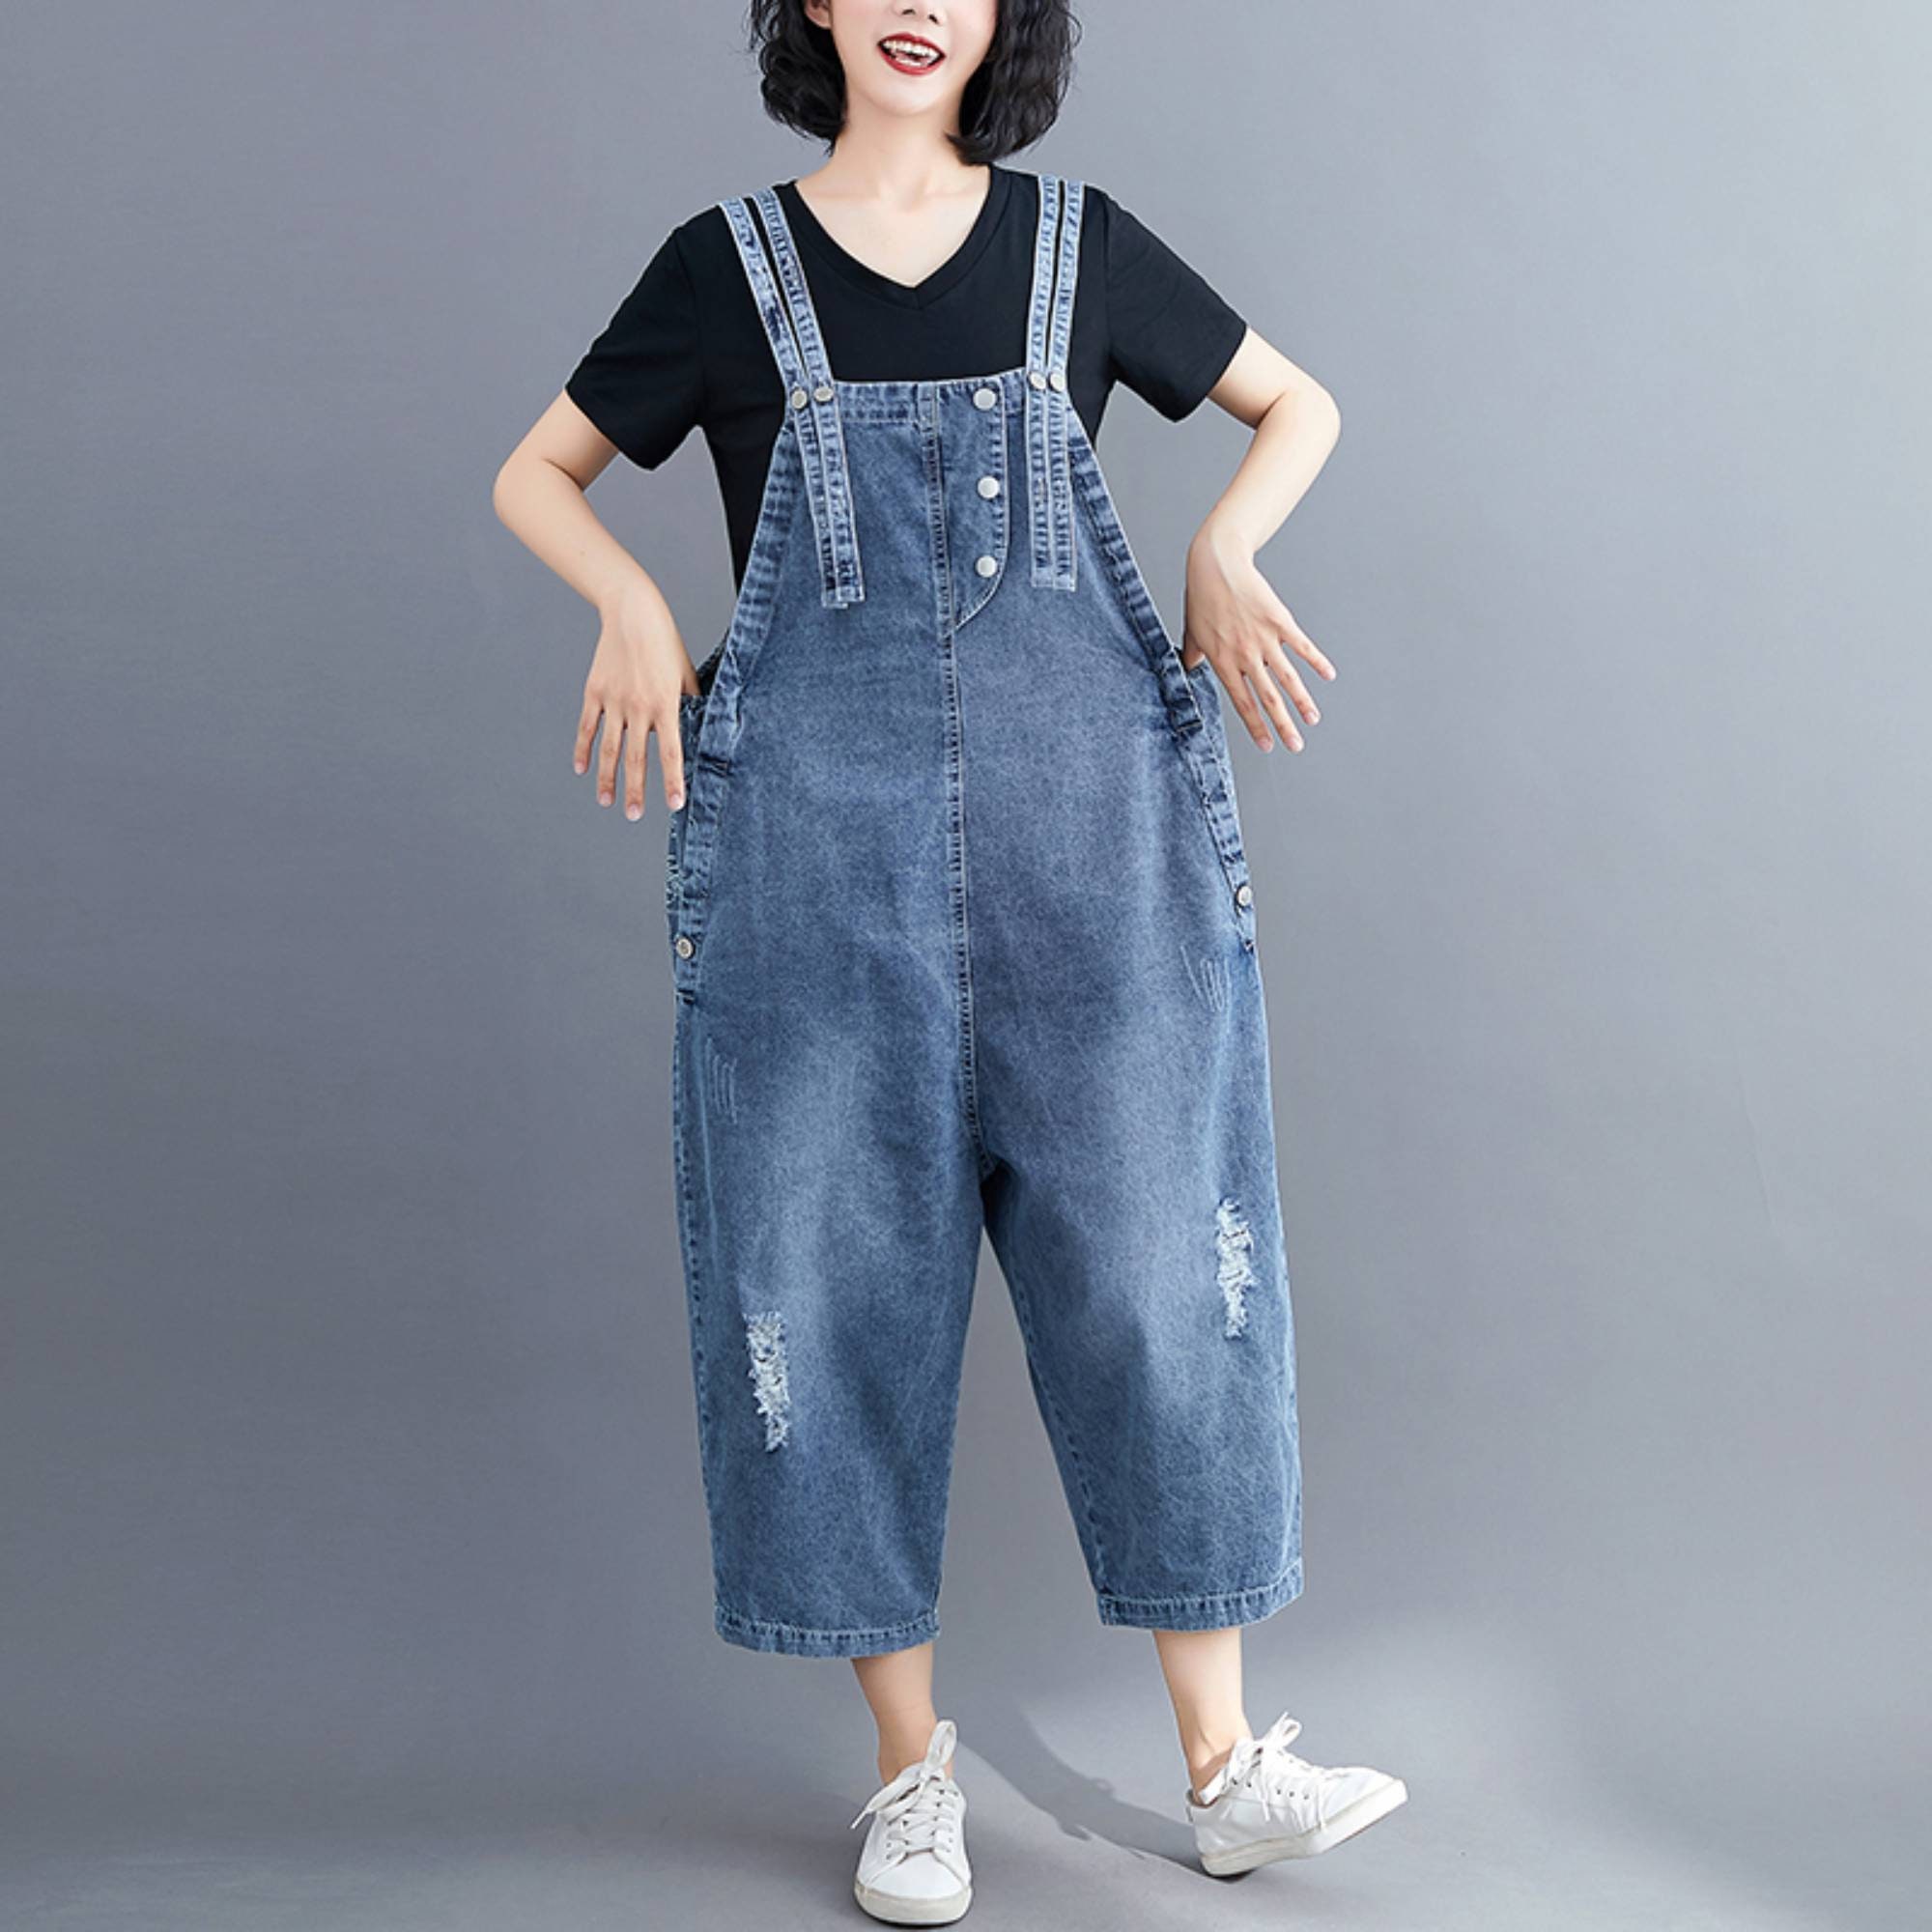 Wash Denim Overalls Baggy Jeans Jumpsuits Wide Leg Overall - Etsy